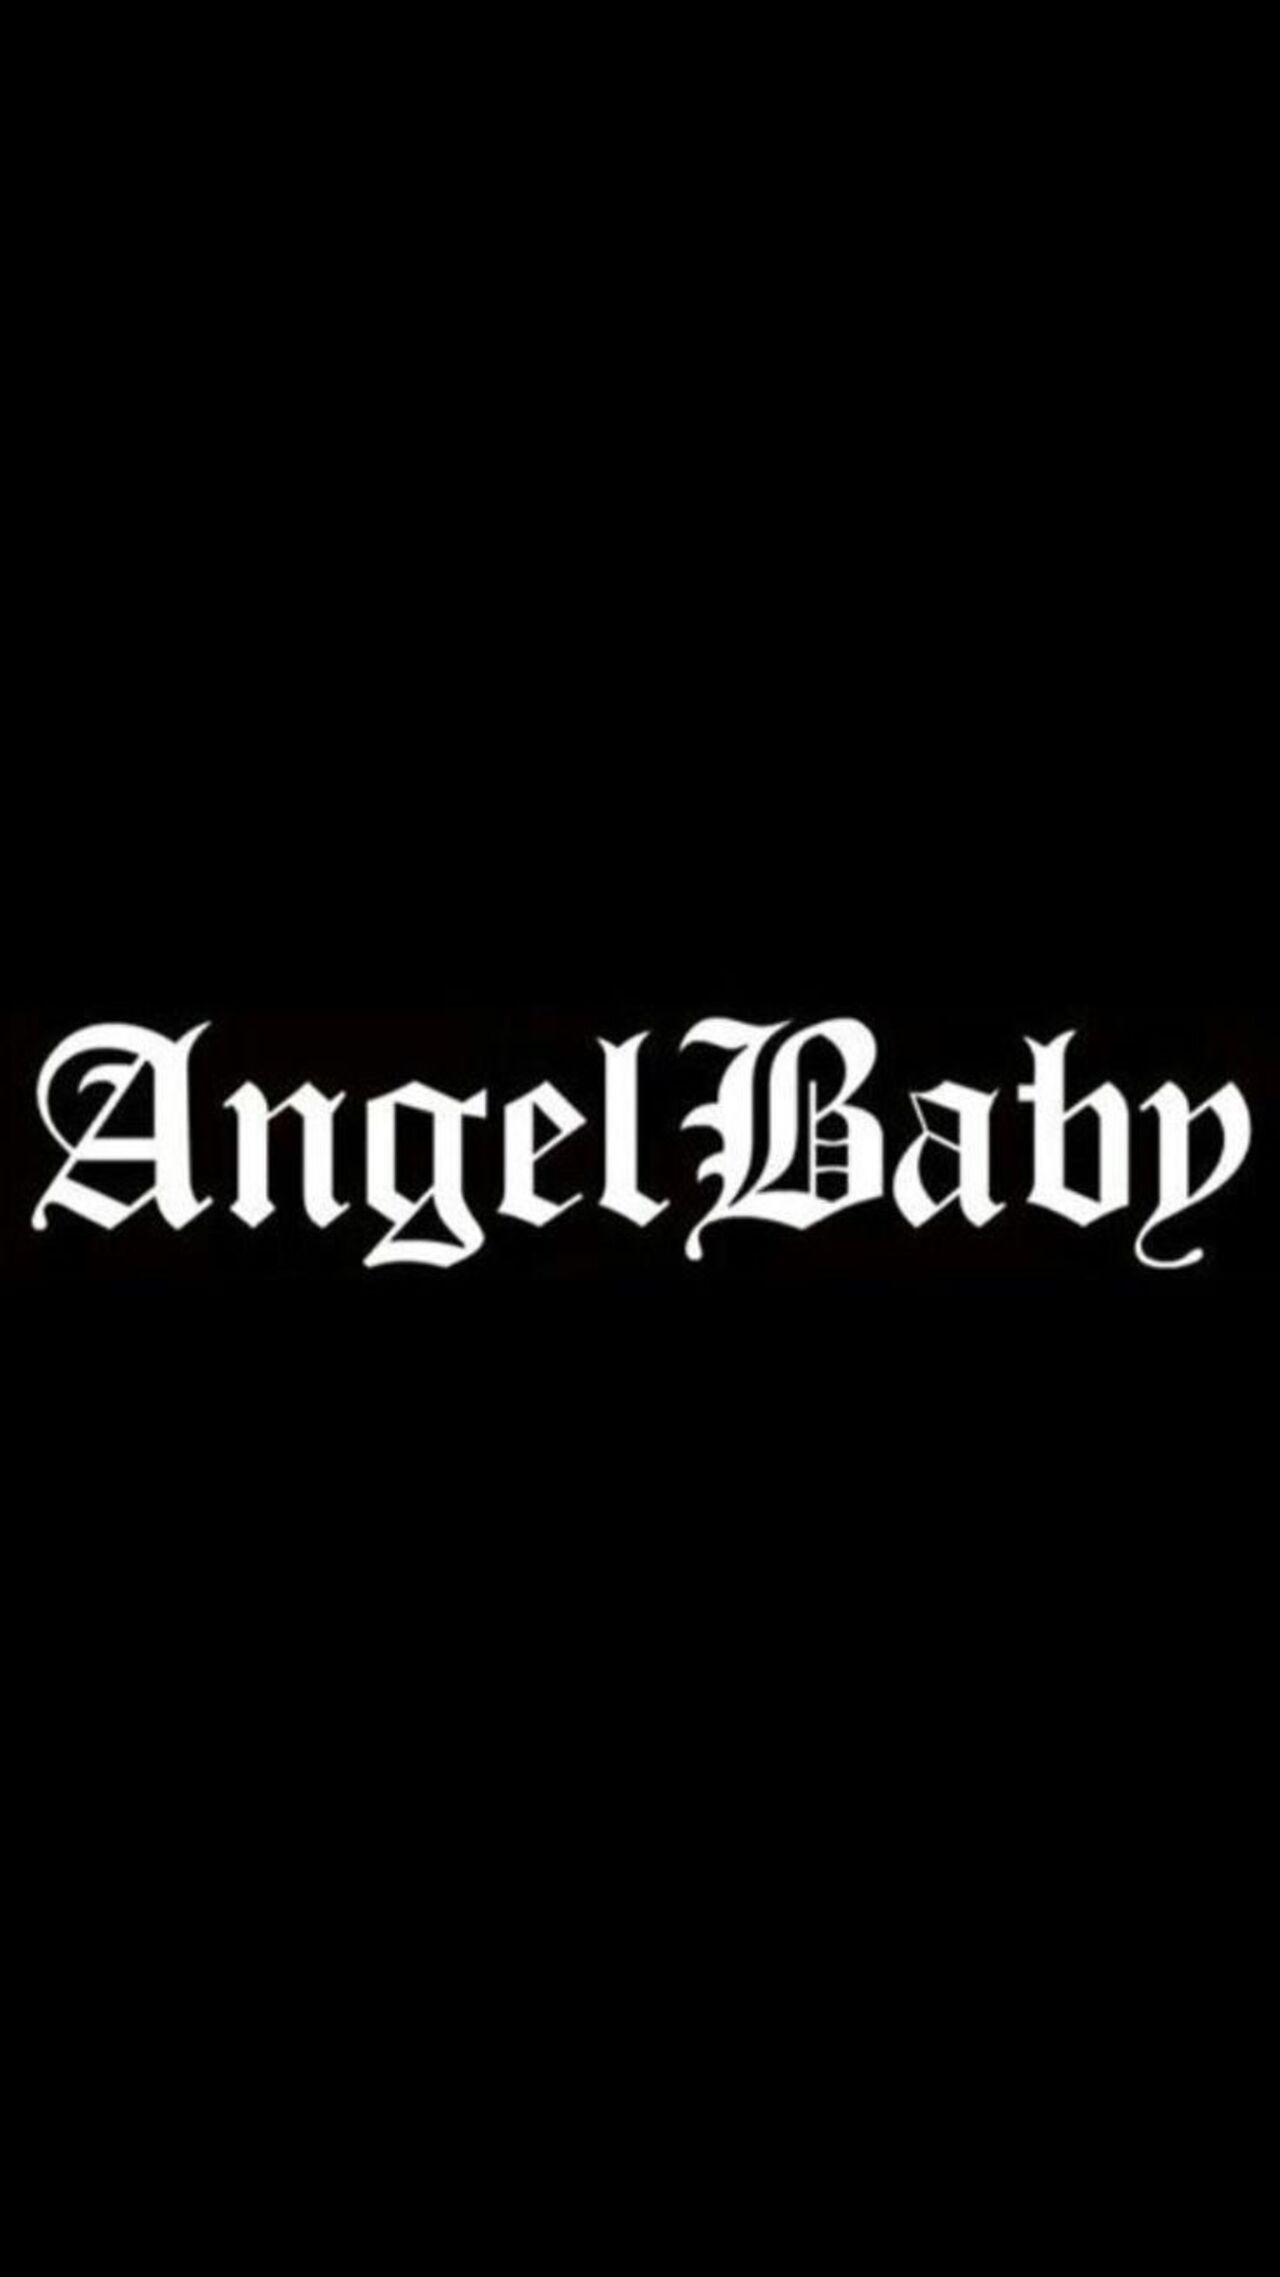 See Angel-baby profile